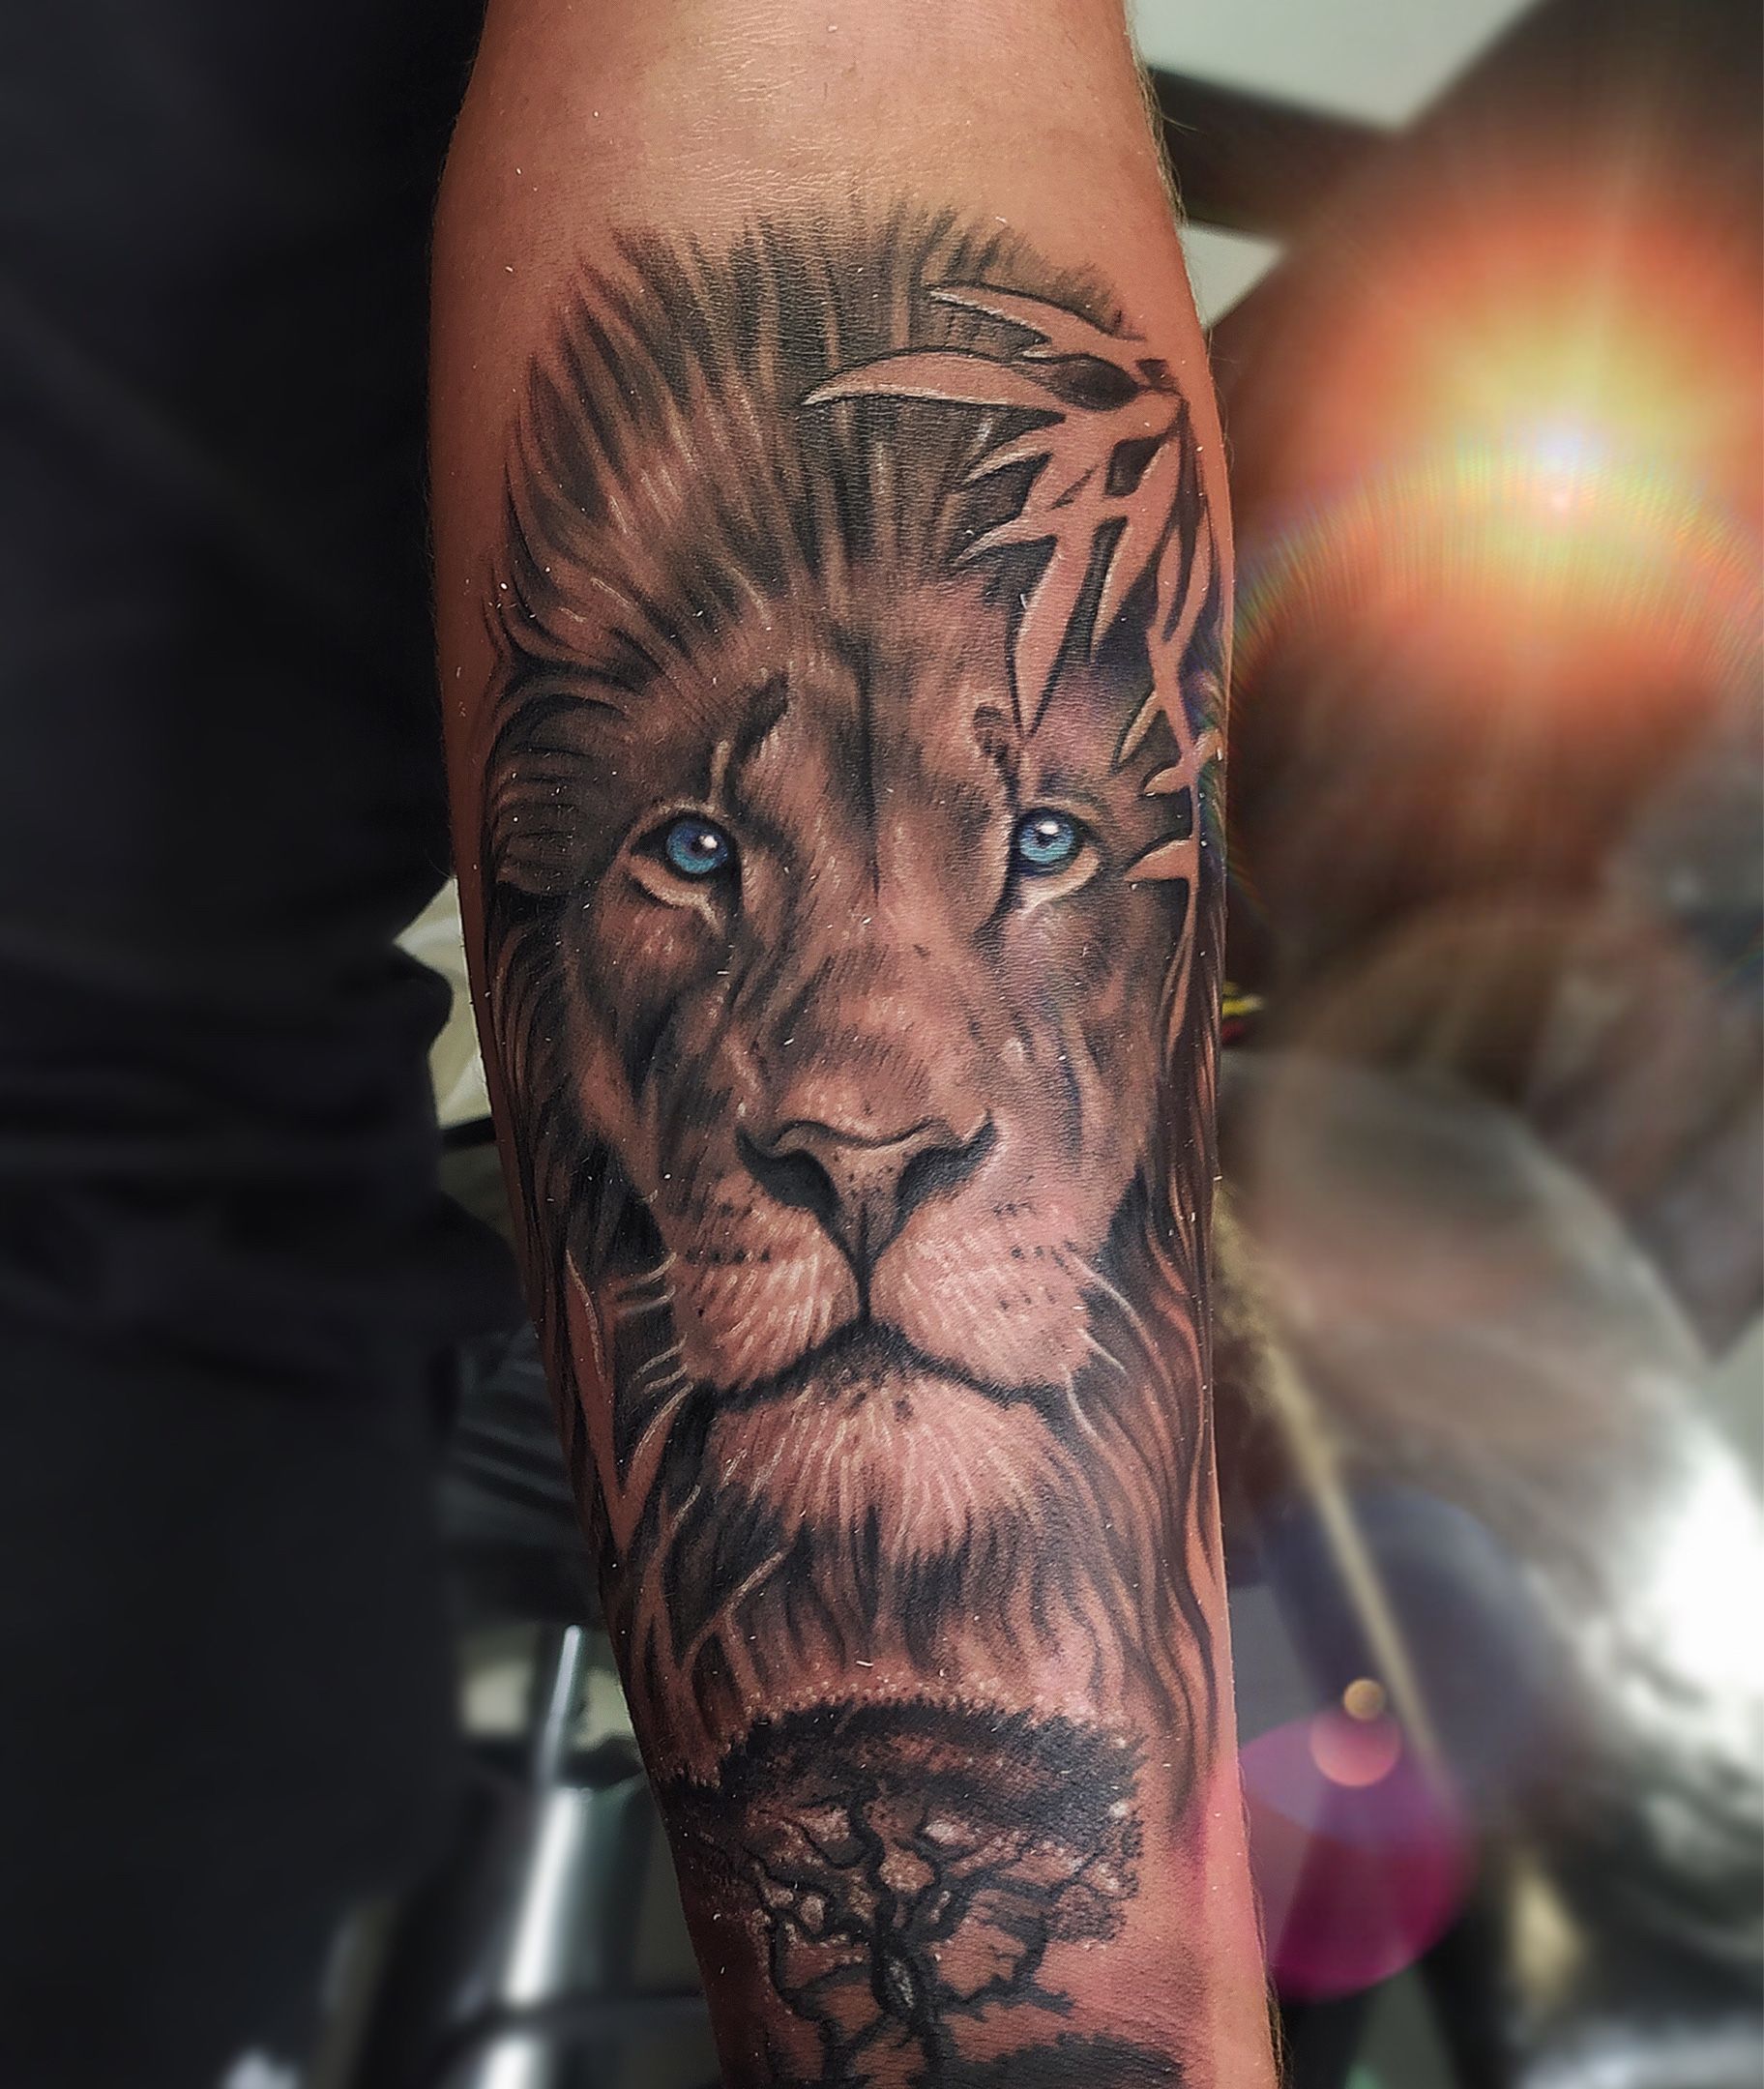 7 Train Tattoo  Lion tattoo done by Ricky Chen 7traintattoo  briangiantsbane Lion tattoo  tattoo lion design black and gray lion  tattoo 7 train Tattoo  Tattoo on arm tattoostattoo design tattoo idea   Facebook